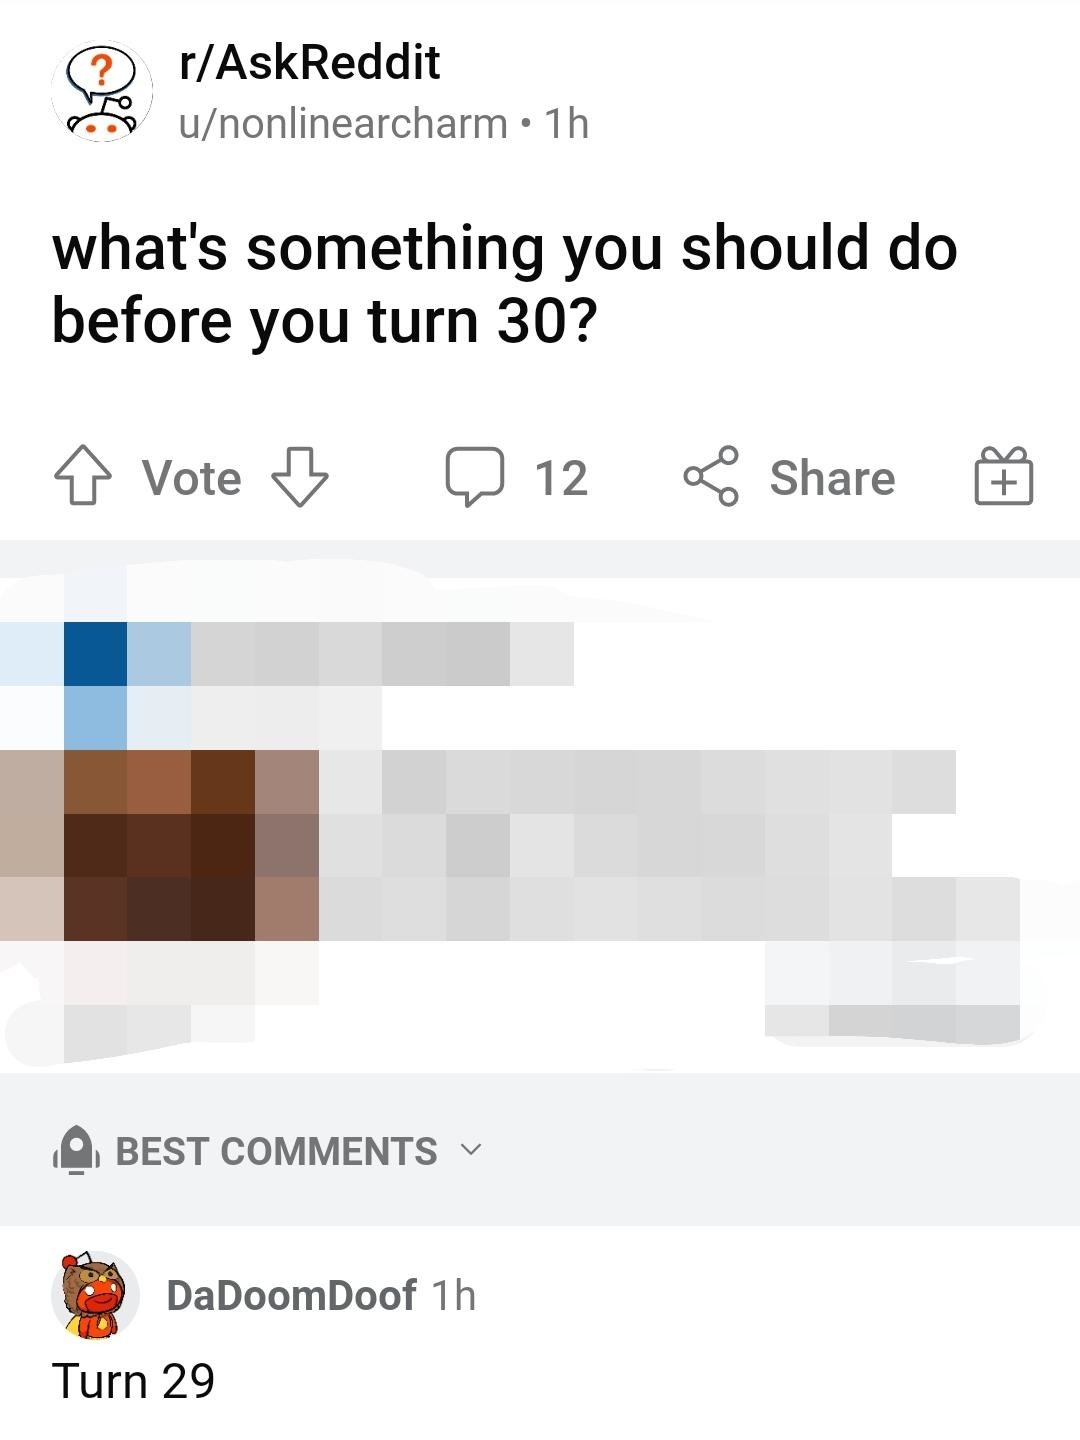 someone asks what you should do before you turn 30 and someone says turn 29